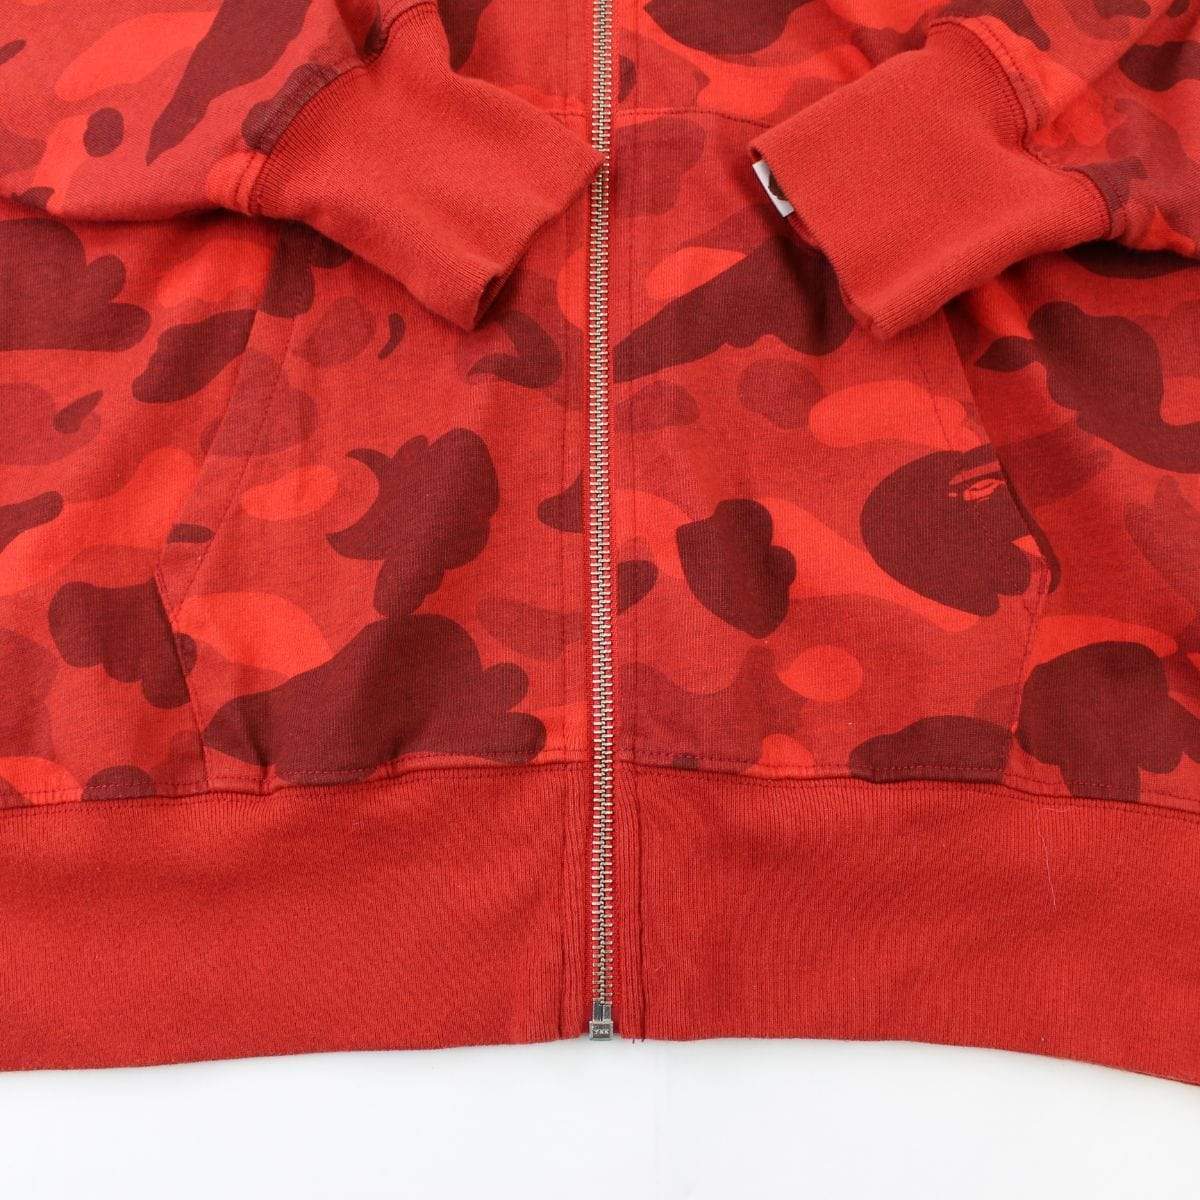 Bape x Champion Red Camo Full Zip Hoodie | SaruGeneral